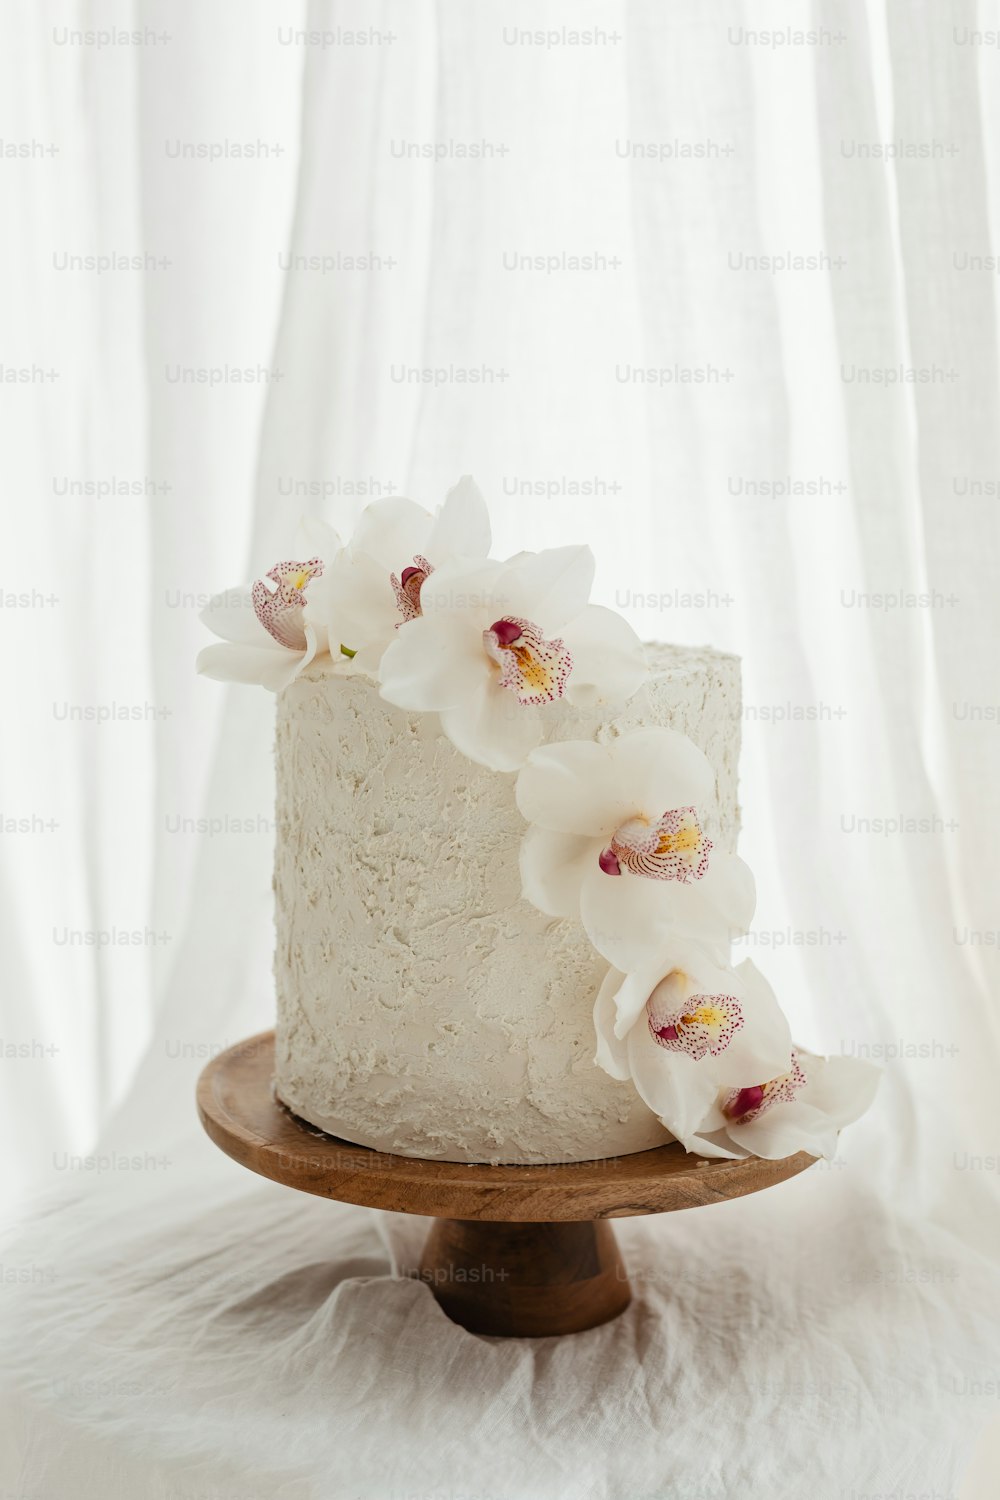 a close up of a cake with flowers on it